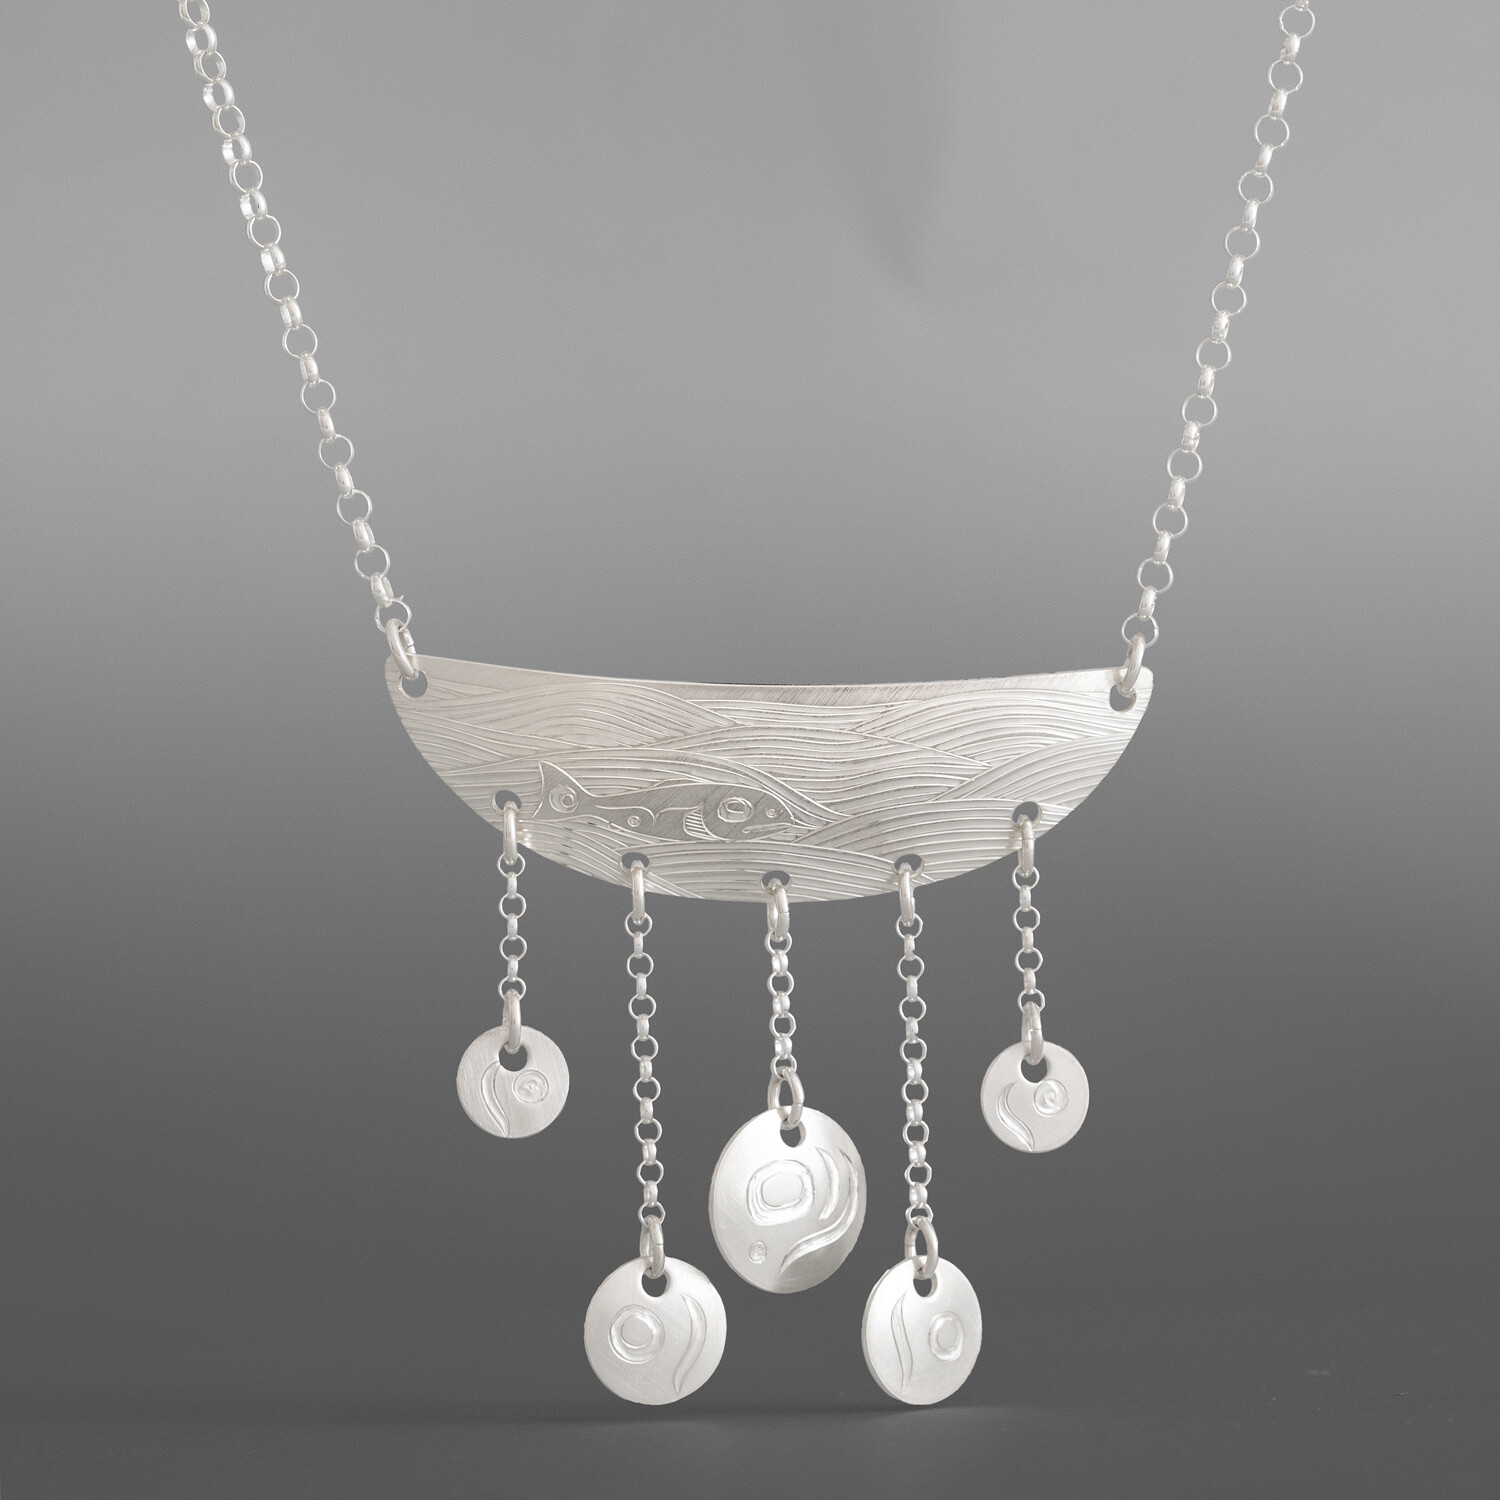 Salmon Spawn Necklace
Jennifer Younger
Tlingit
Silver, silver chain
2½” x 1¾”
$350